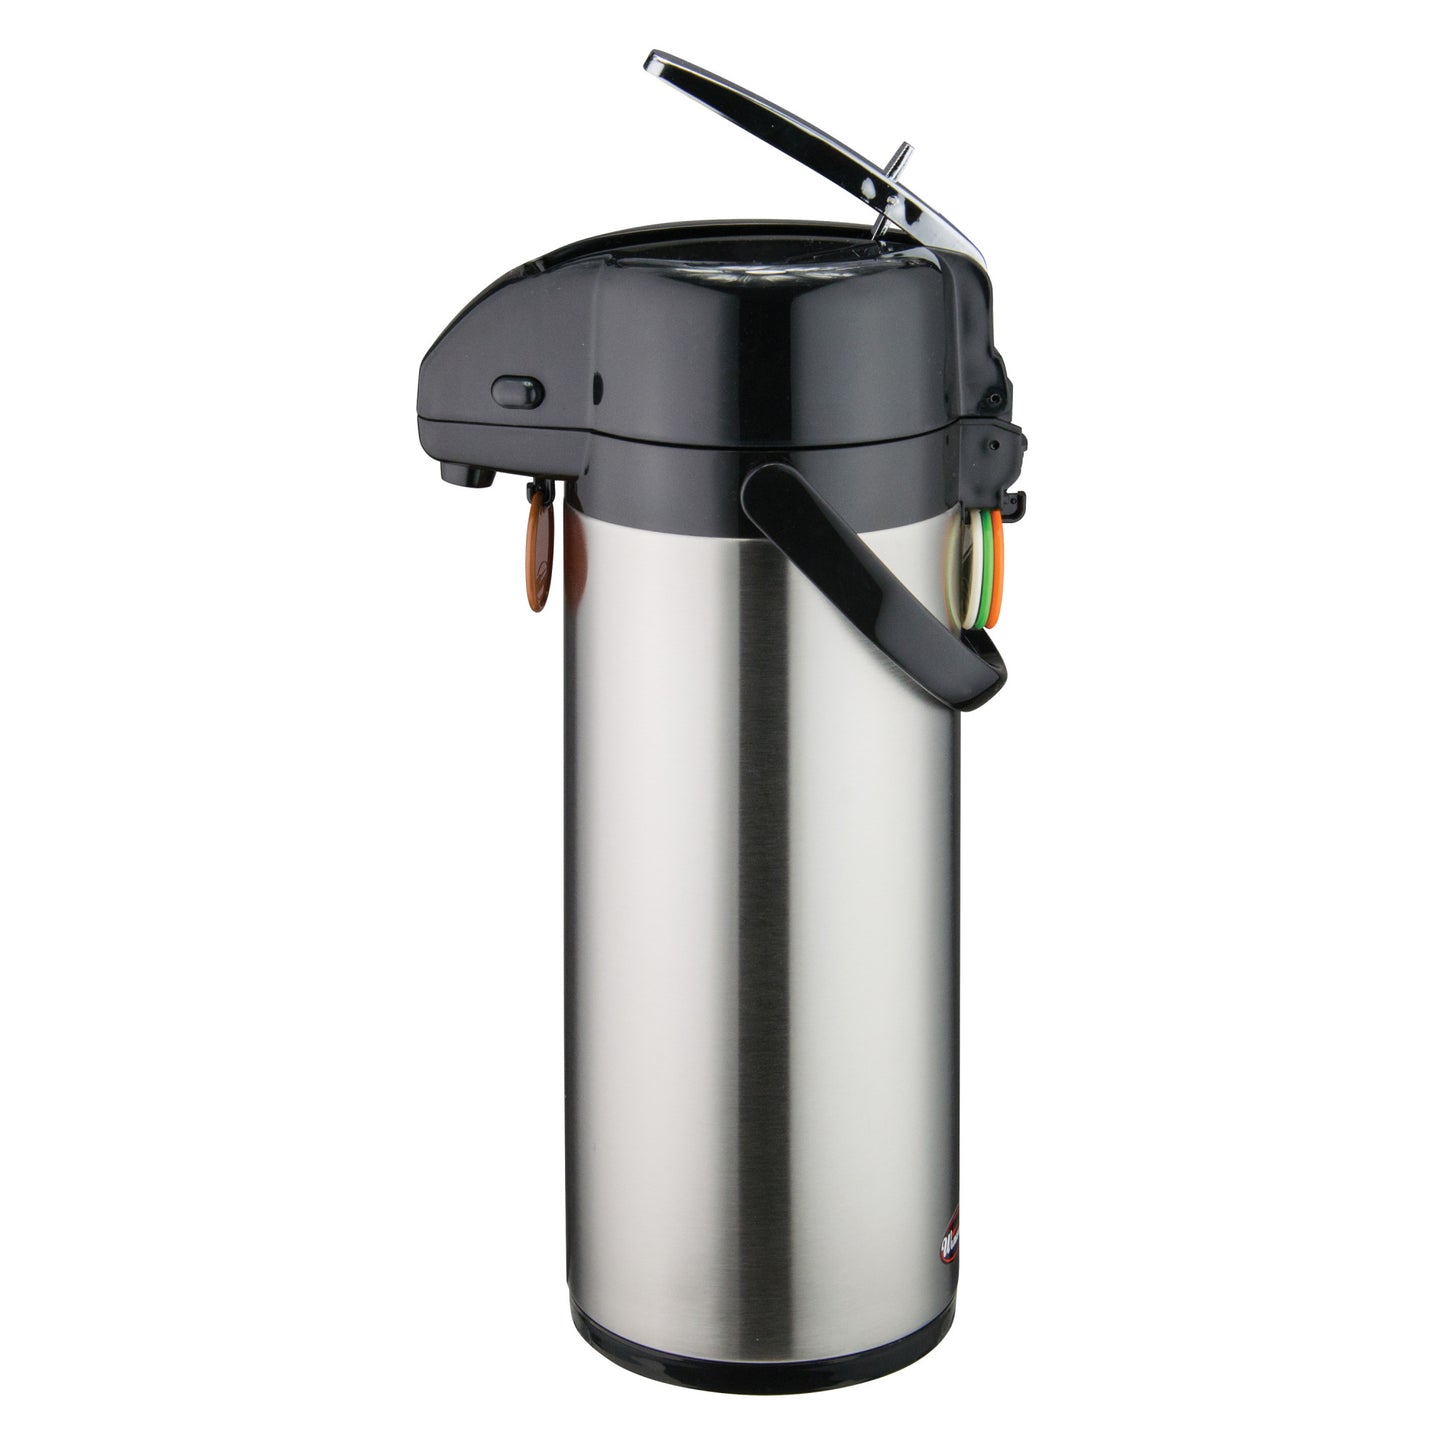 APSK-730 - Stainless Steel Lined Airpot, Lever Top - 3 Liter